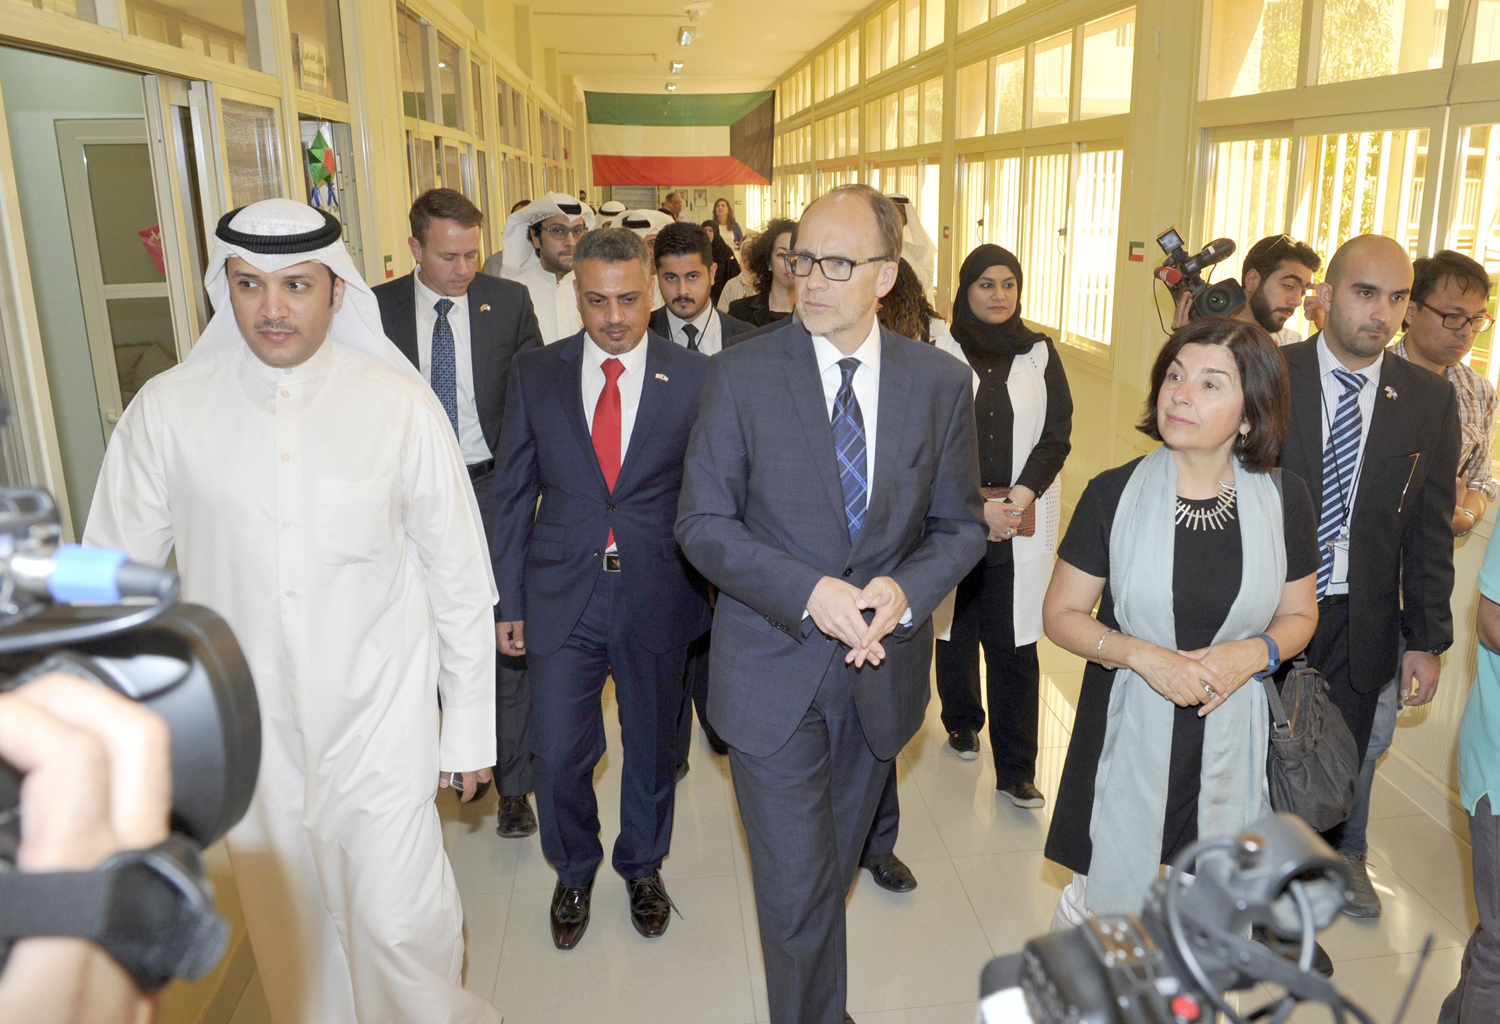 US Ambassador to Kuwait Douglas Silliman during his visit to the Kuwaiti center for sheltering foreign workers